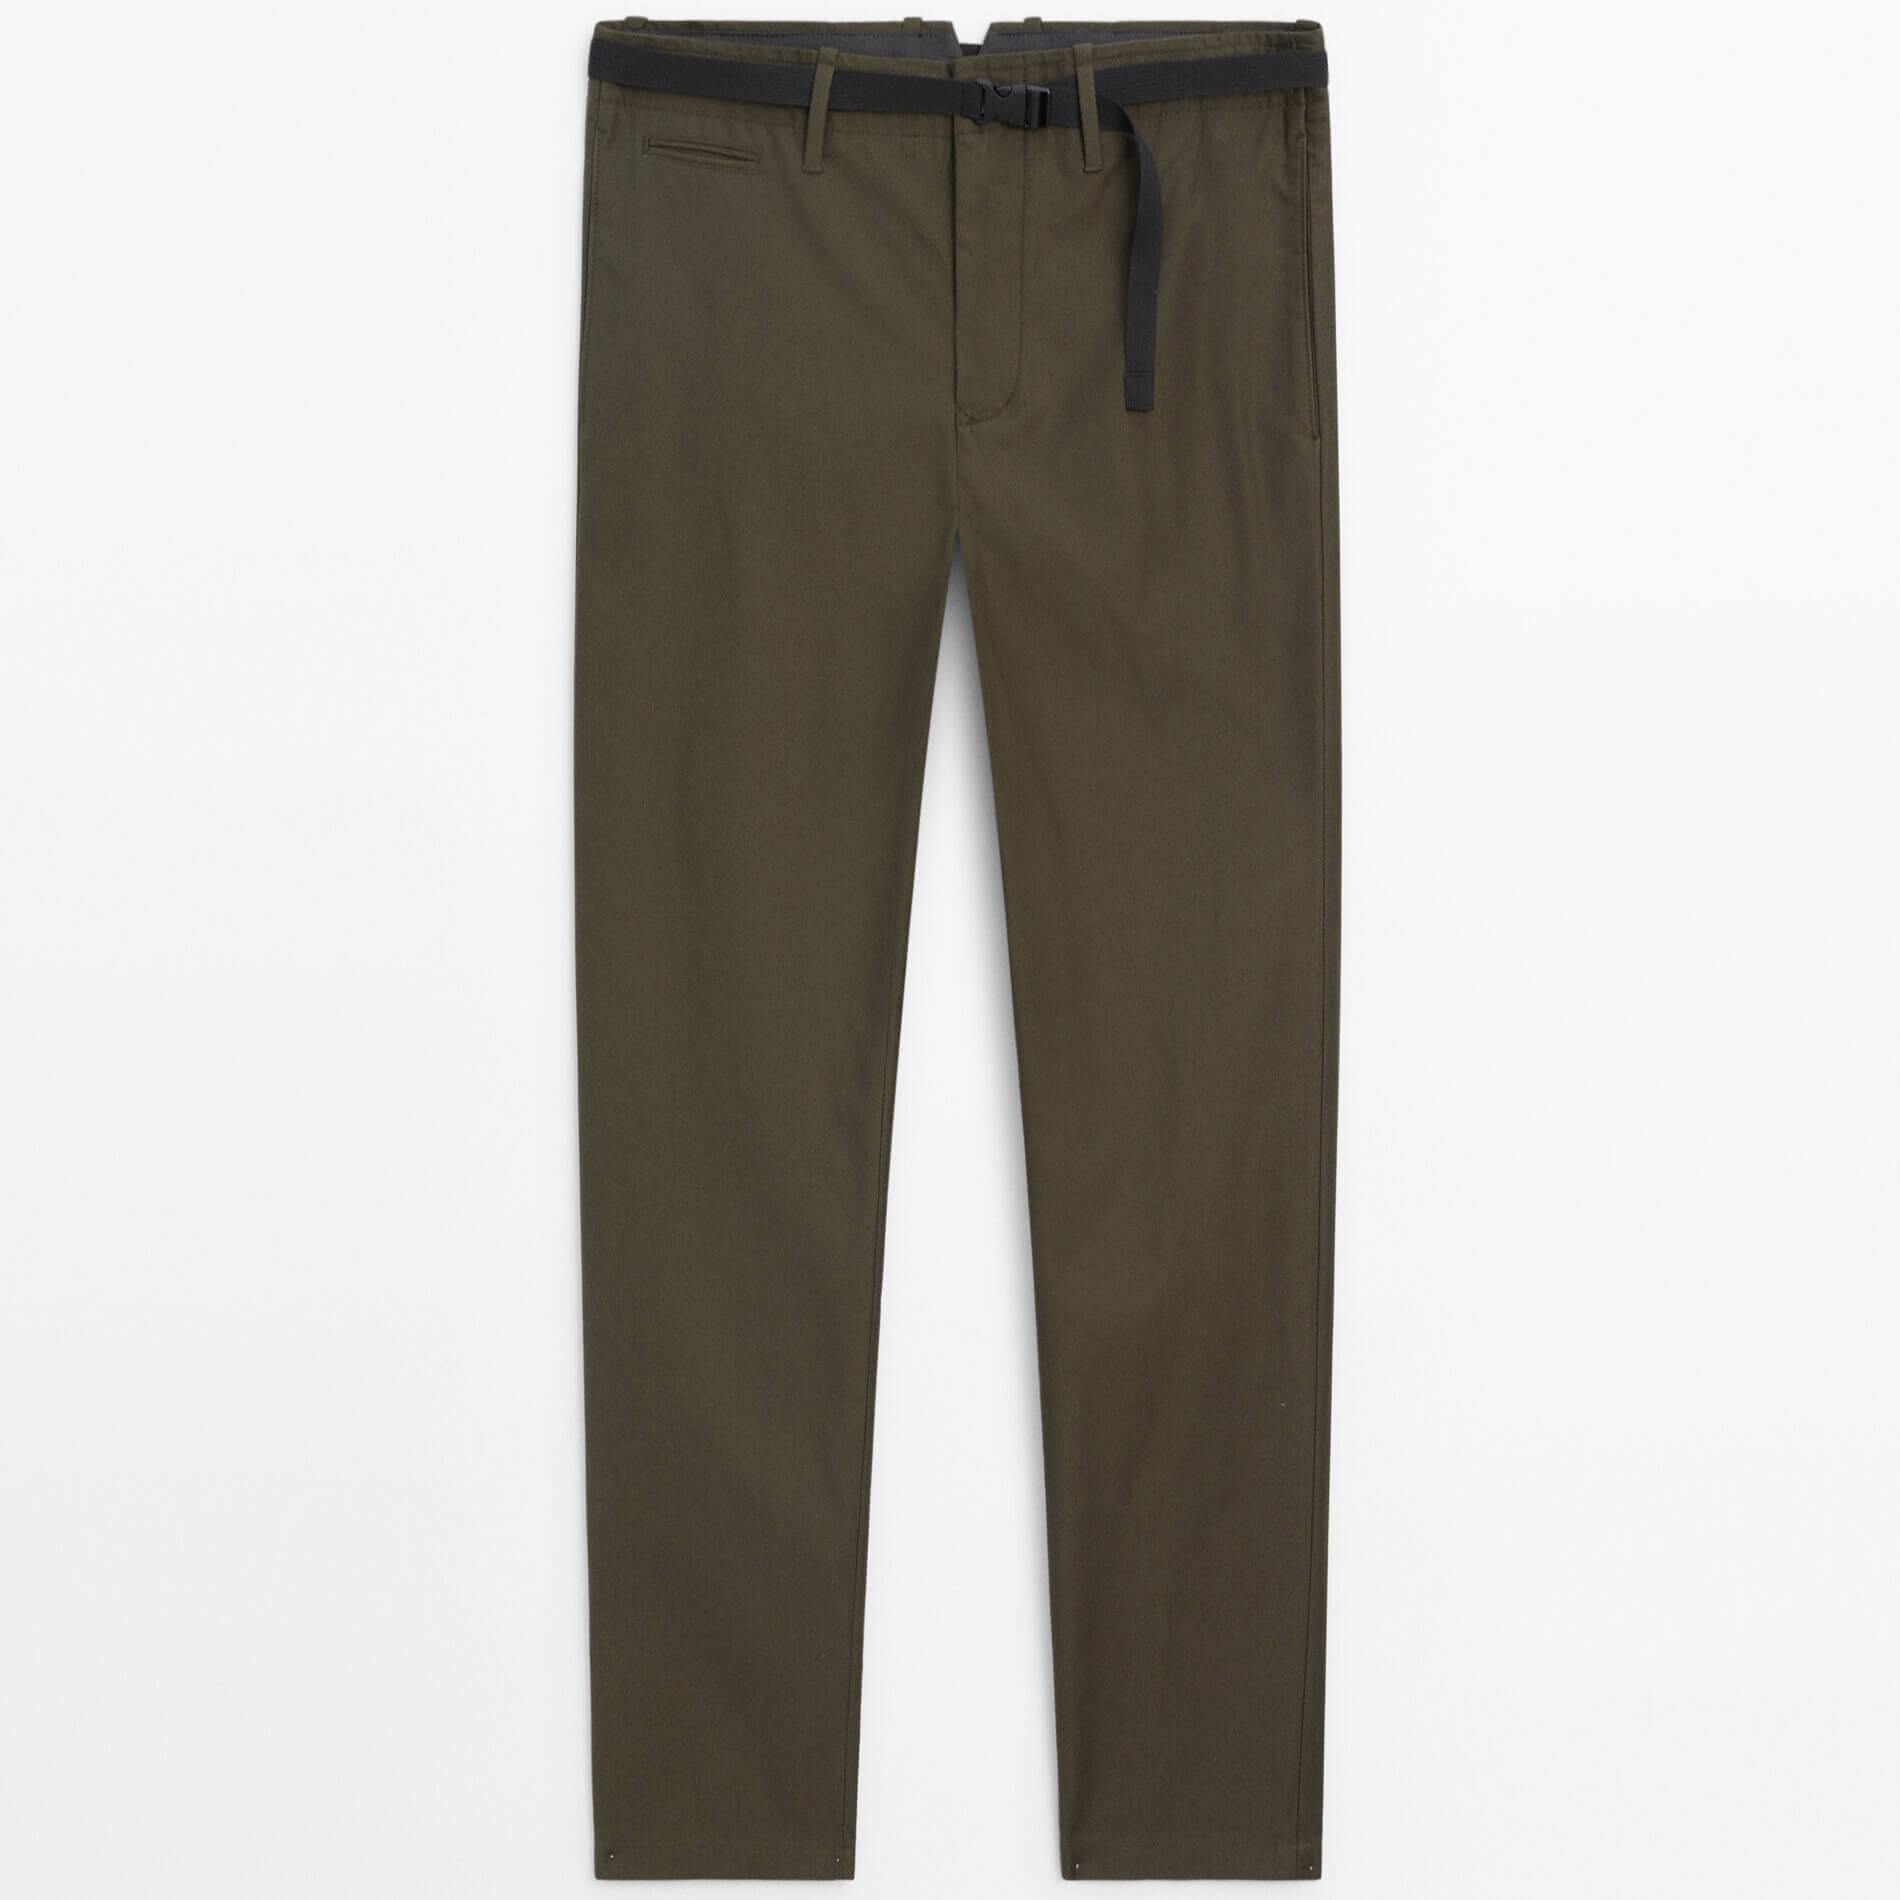 Брюки Massimo Dutti Relaxed Fit Belted Chino, хаки брюки massimo dutti relaxed fit belted chino бежевый